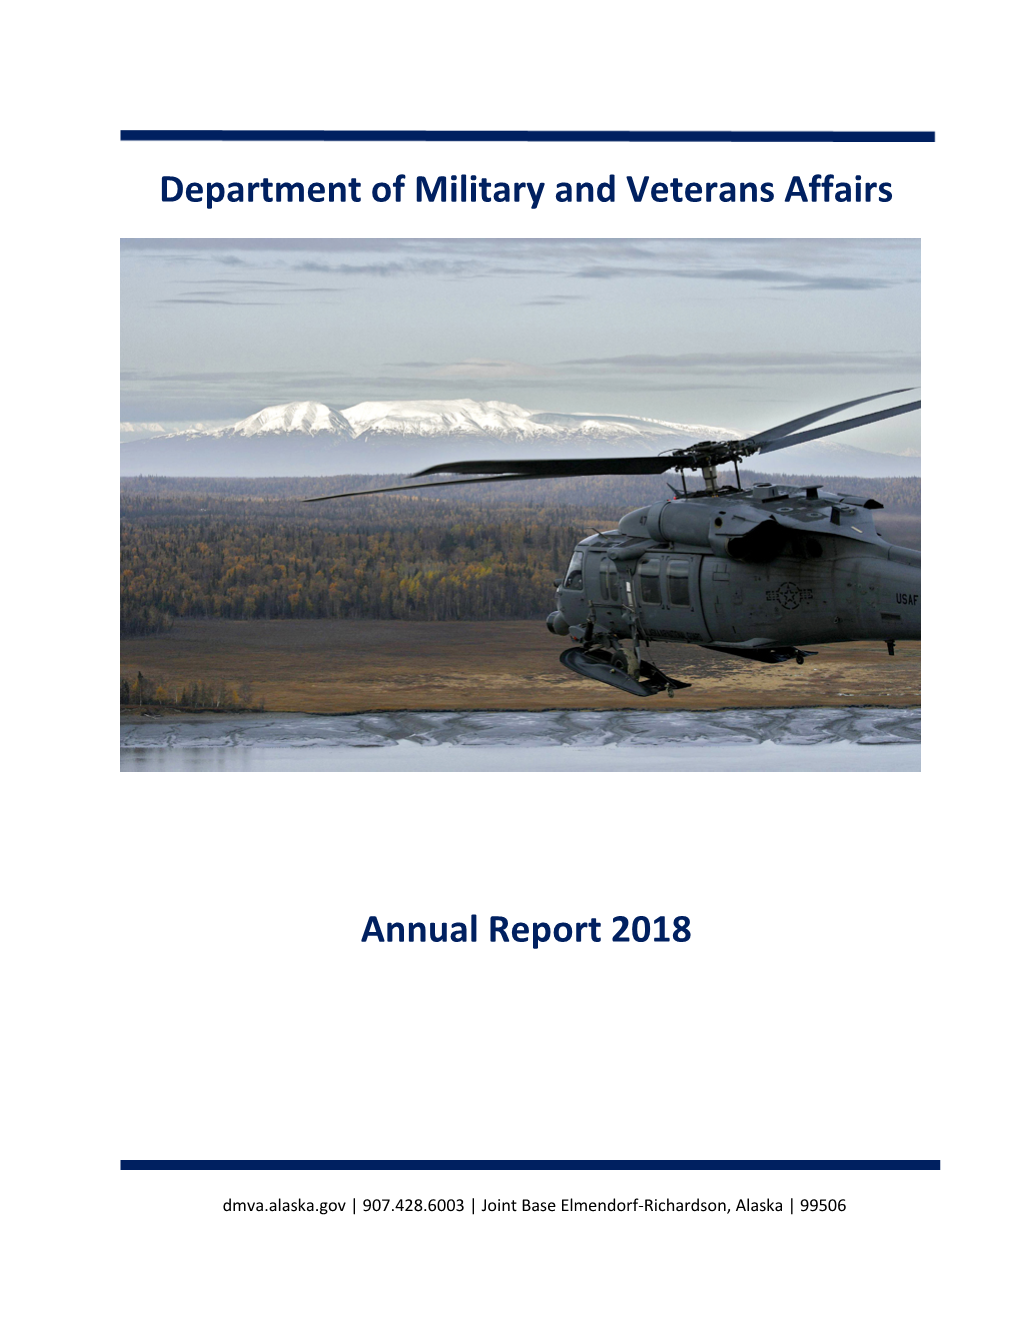 Department of Military and Veterans Affairs Annual Report 2018